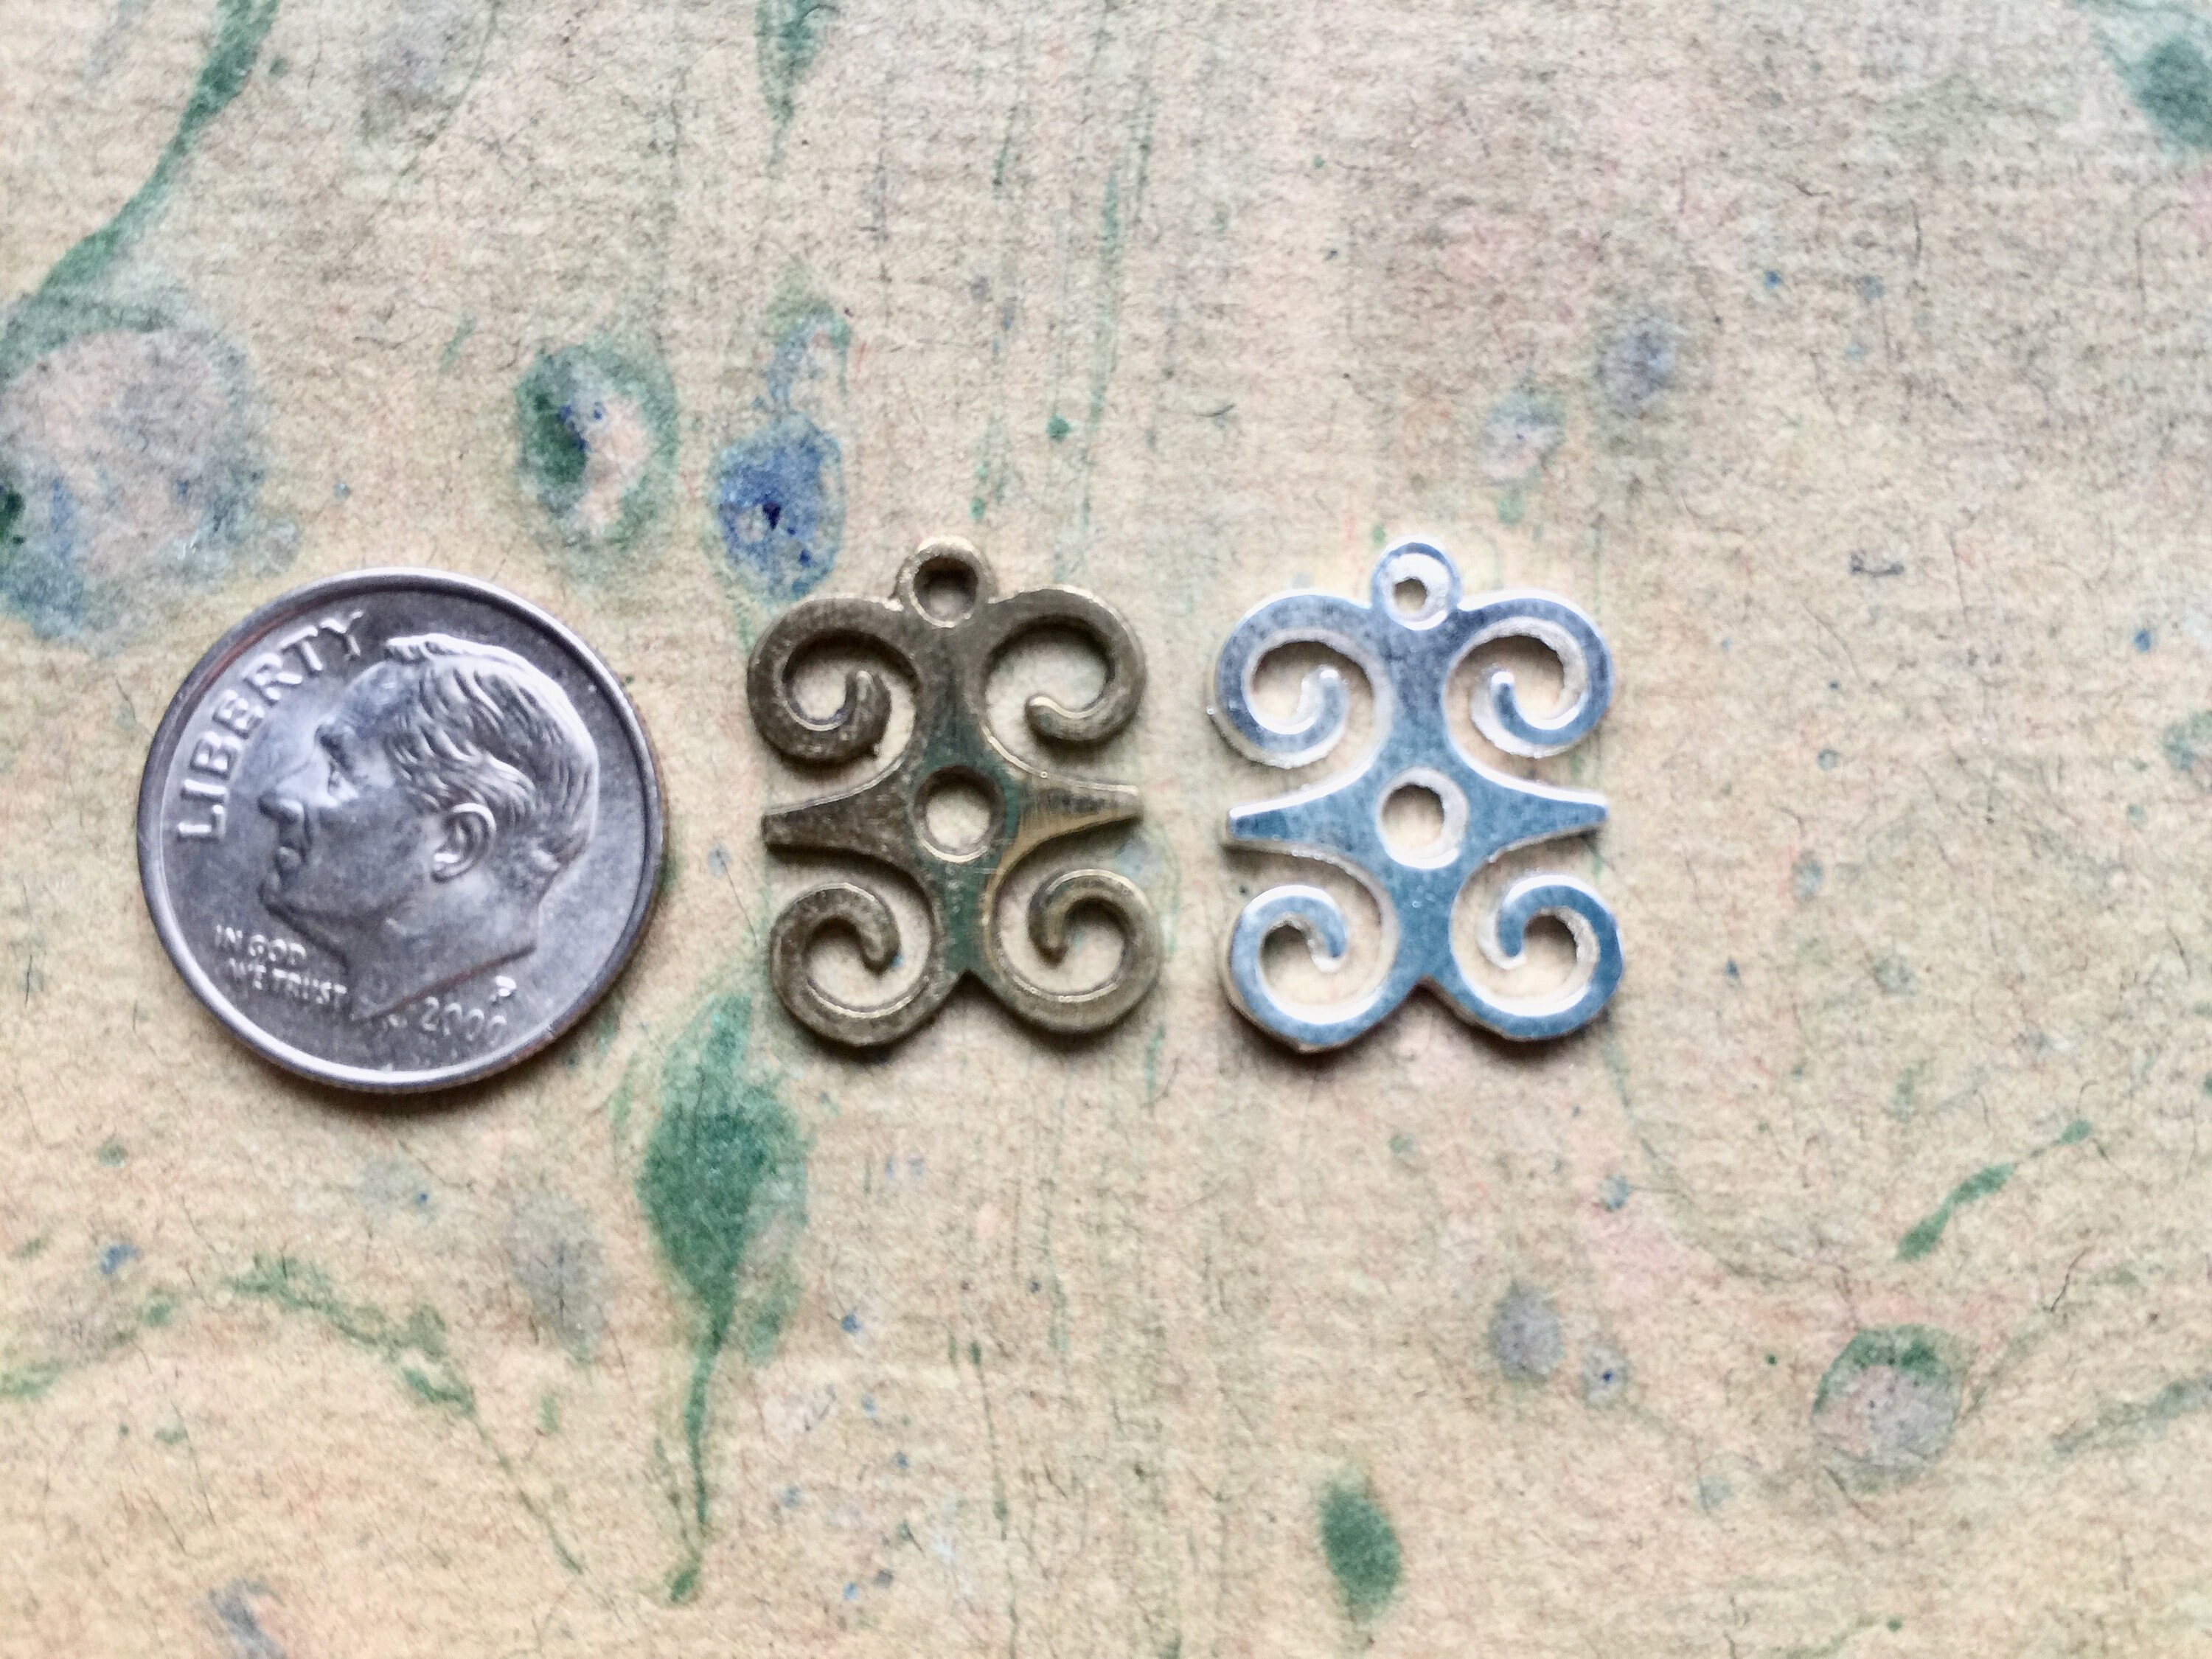 4 Pieces Small Brass Or Silver-Plated Adinkra Dwennimmen Ram's Horns Charms 13x18mm